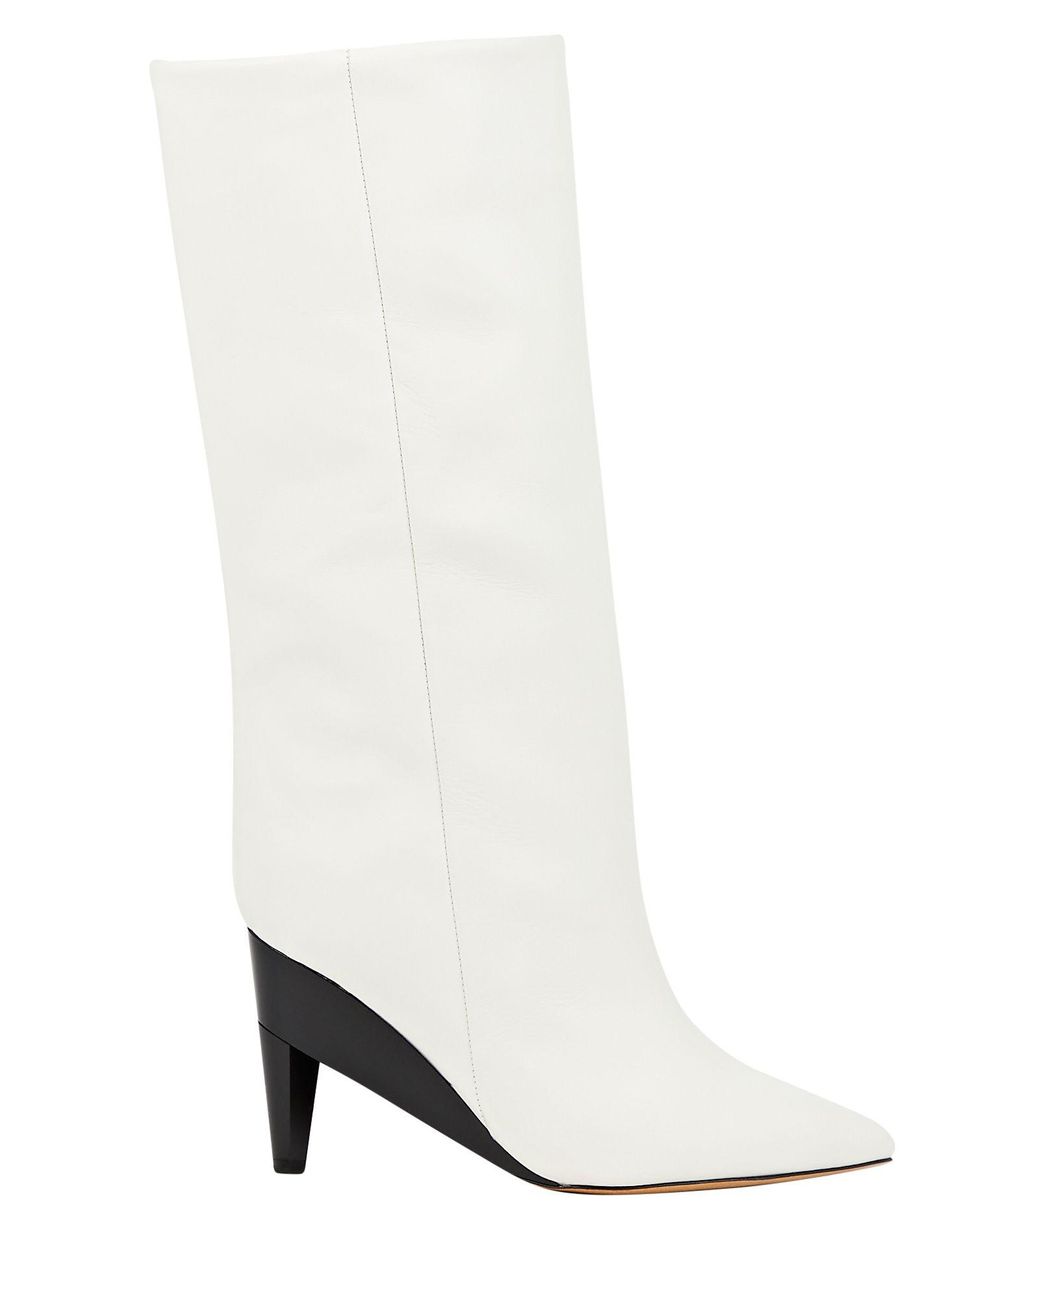 Isabel Marant Liesel Leather Boots in | Lyst